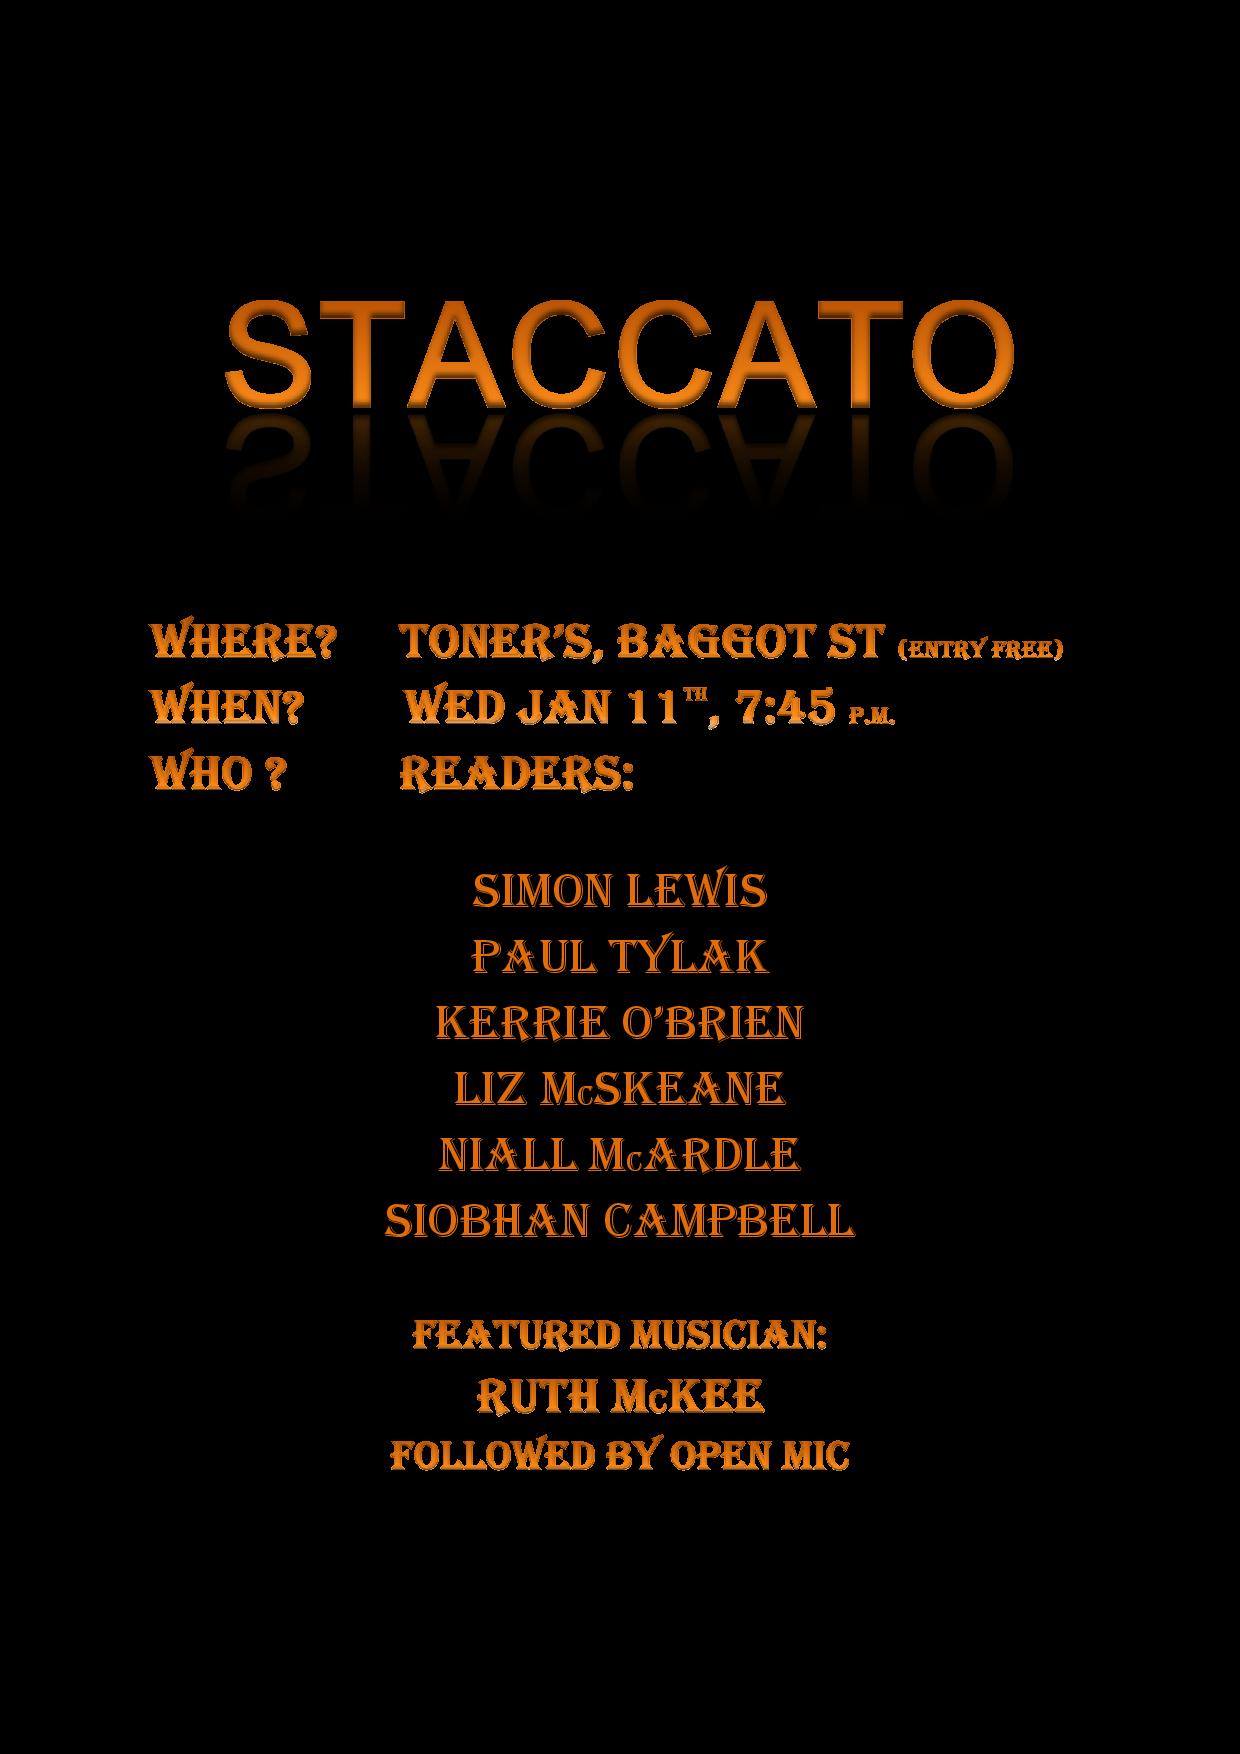 Reading at Staccato, January 11th